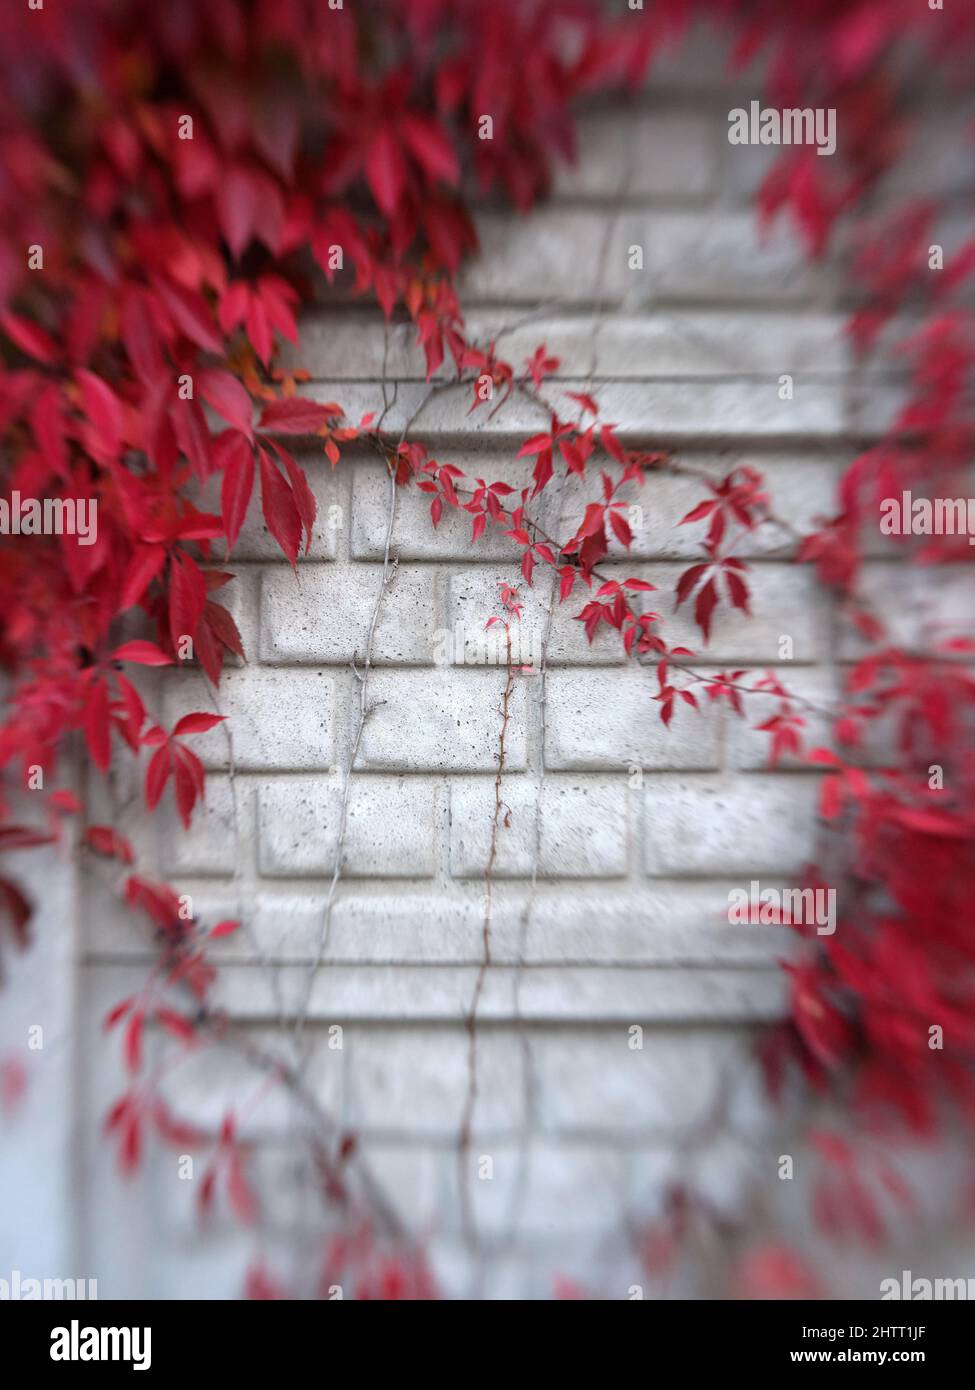 Photo with zoom optical effect of a wall with a climbing plant with red leaves Stock Photo